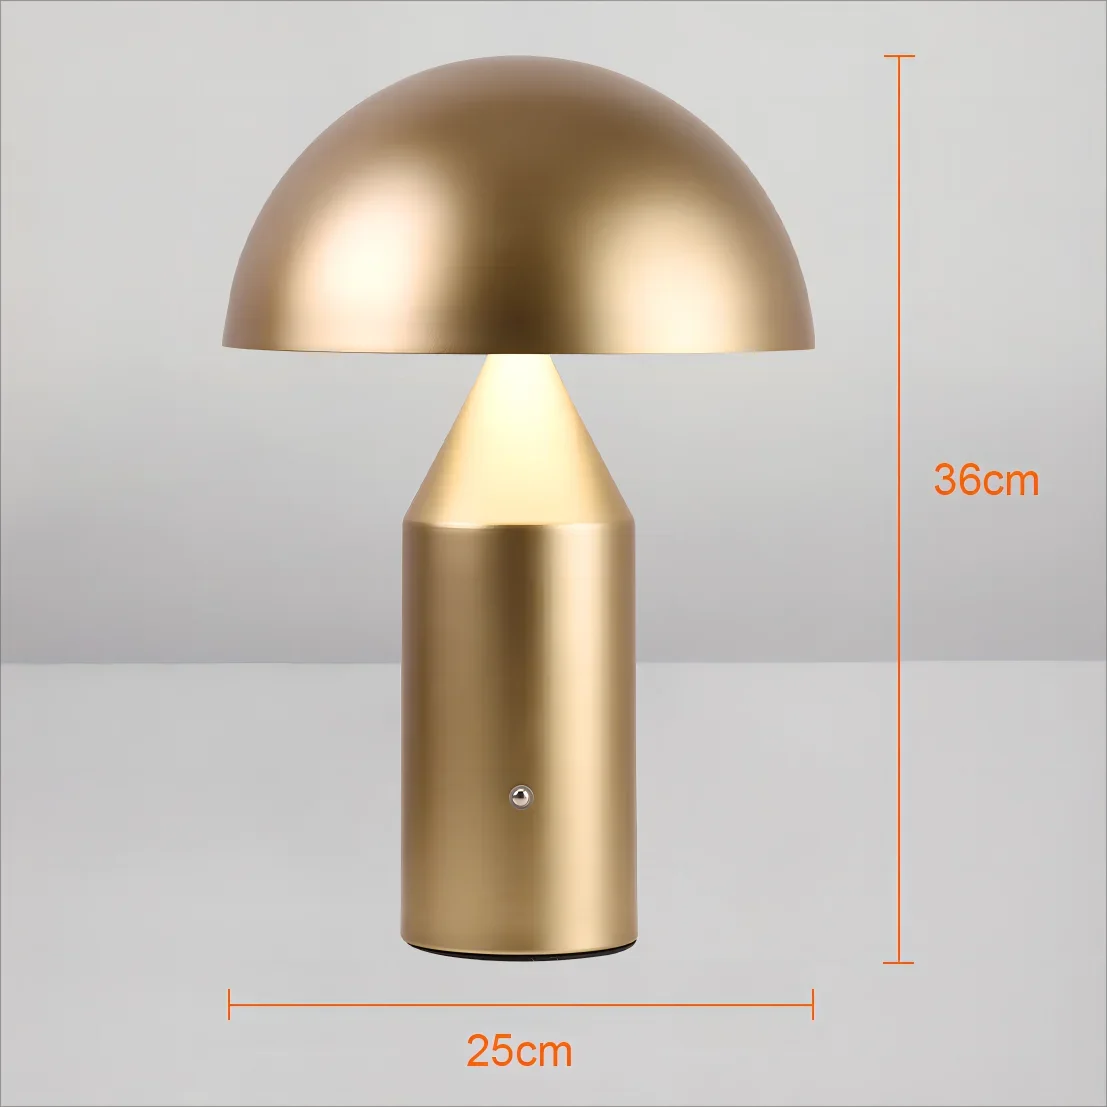 Atollo Mushroom Table Lamp Bedside Modern Lighting For Contemporary Interior Homes - Table Lamps